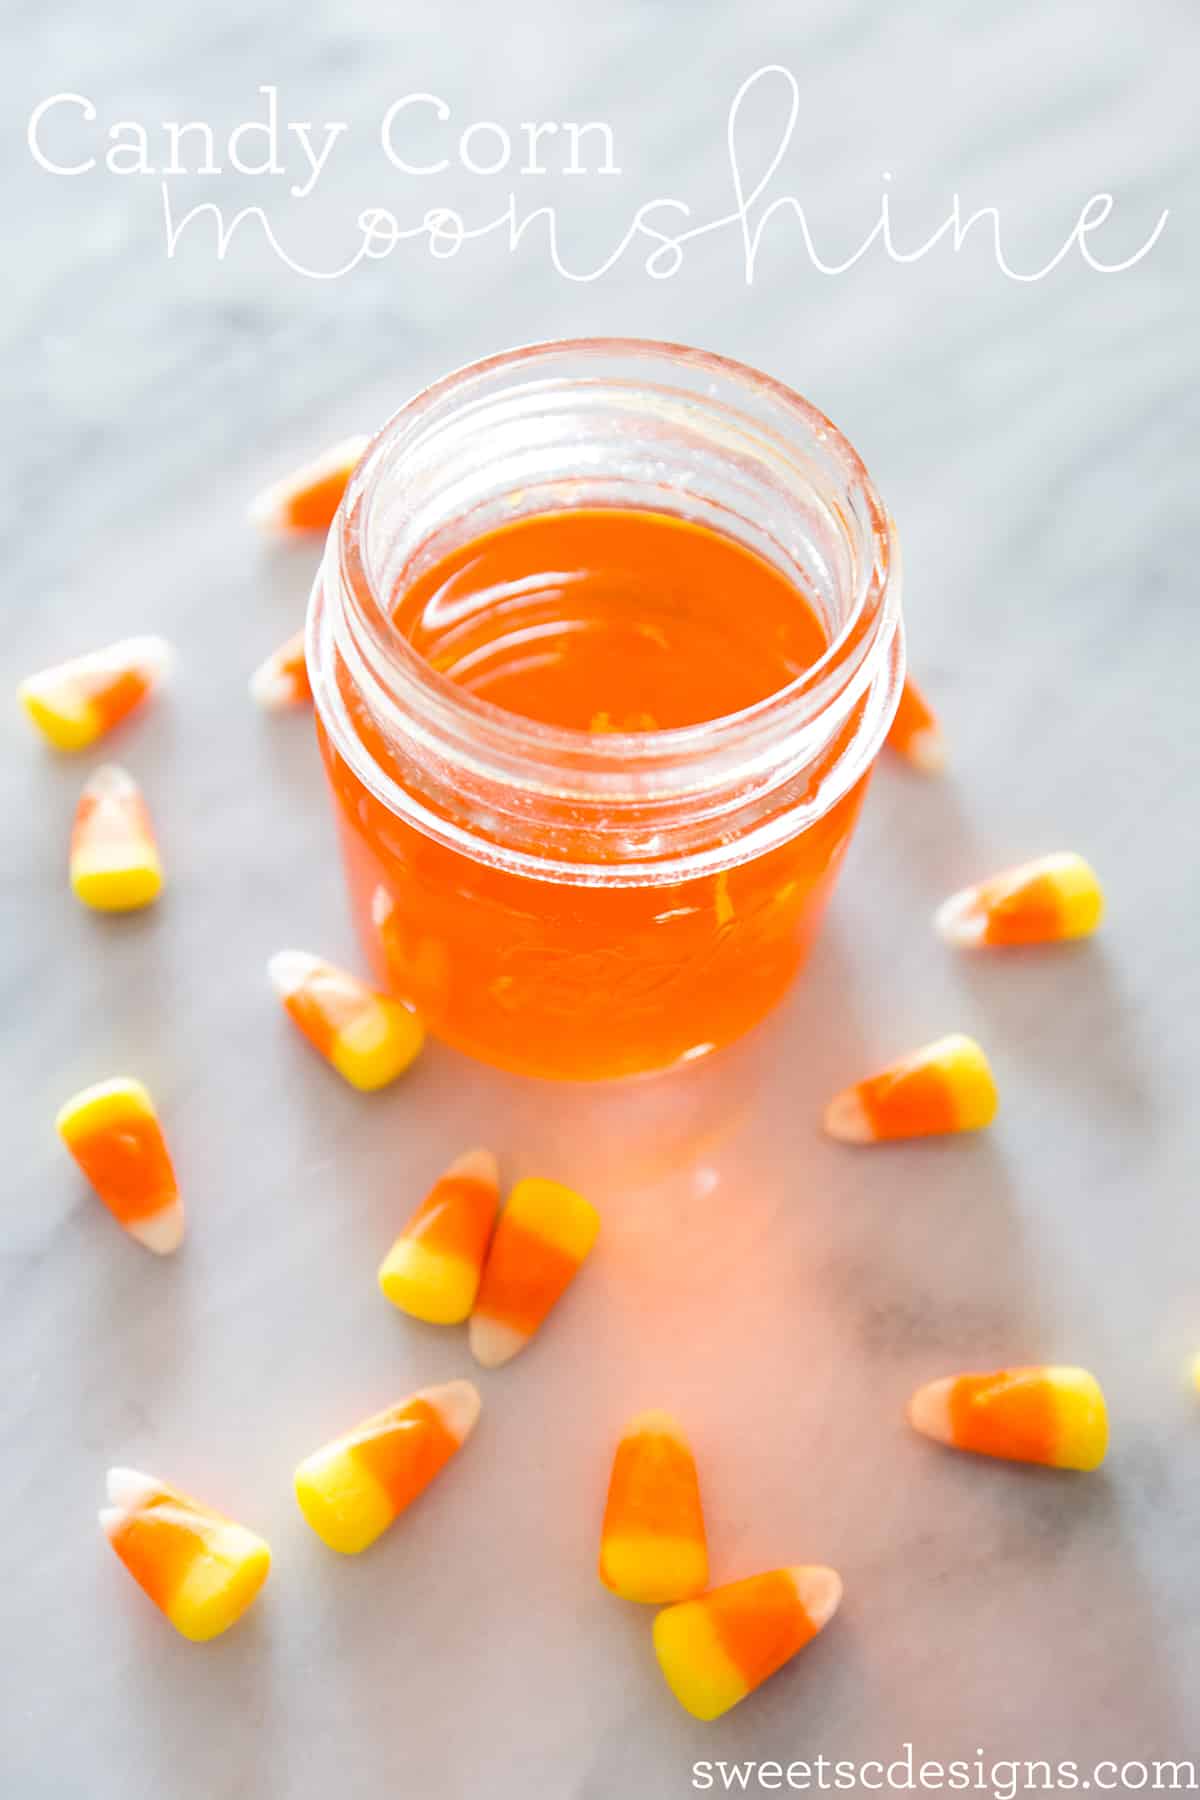 Homemade candy corn moonshine jar, featuring a delightful display of candy corns submerged in the infusion.